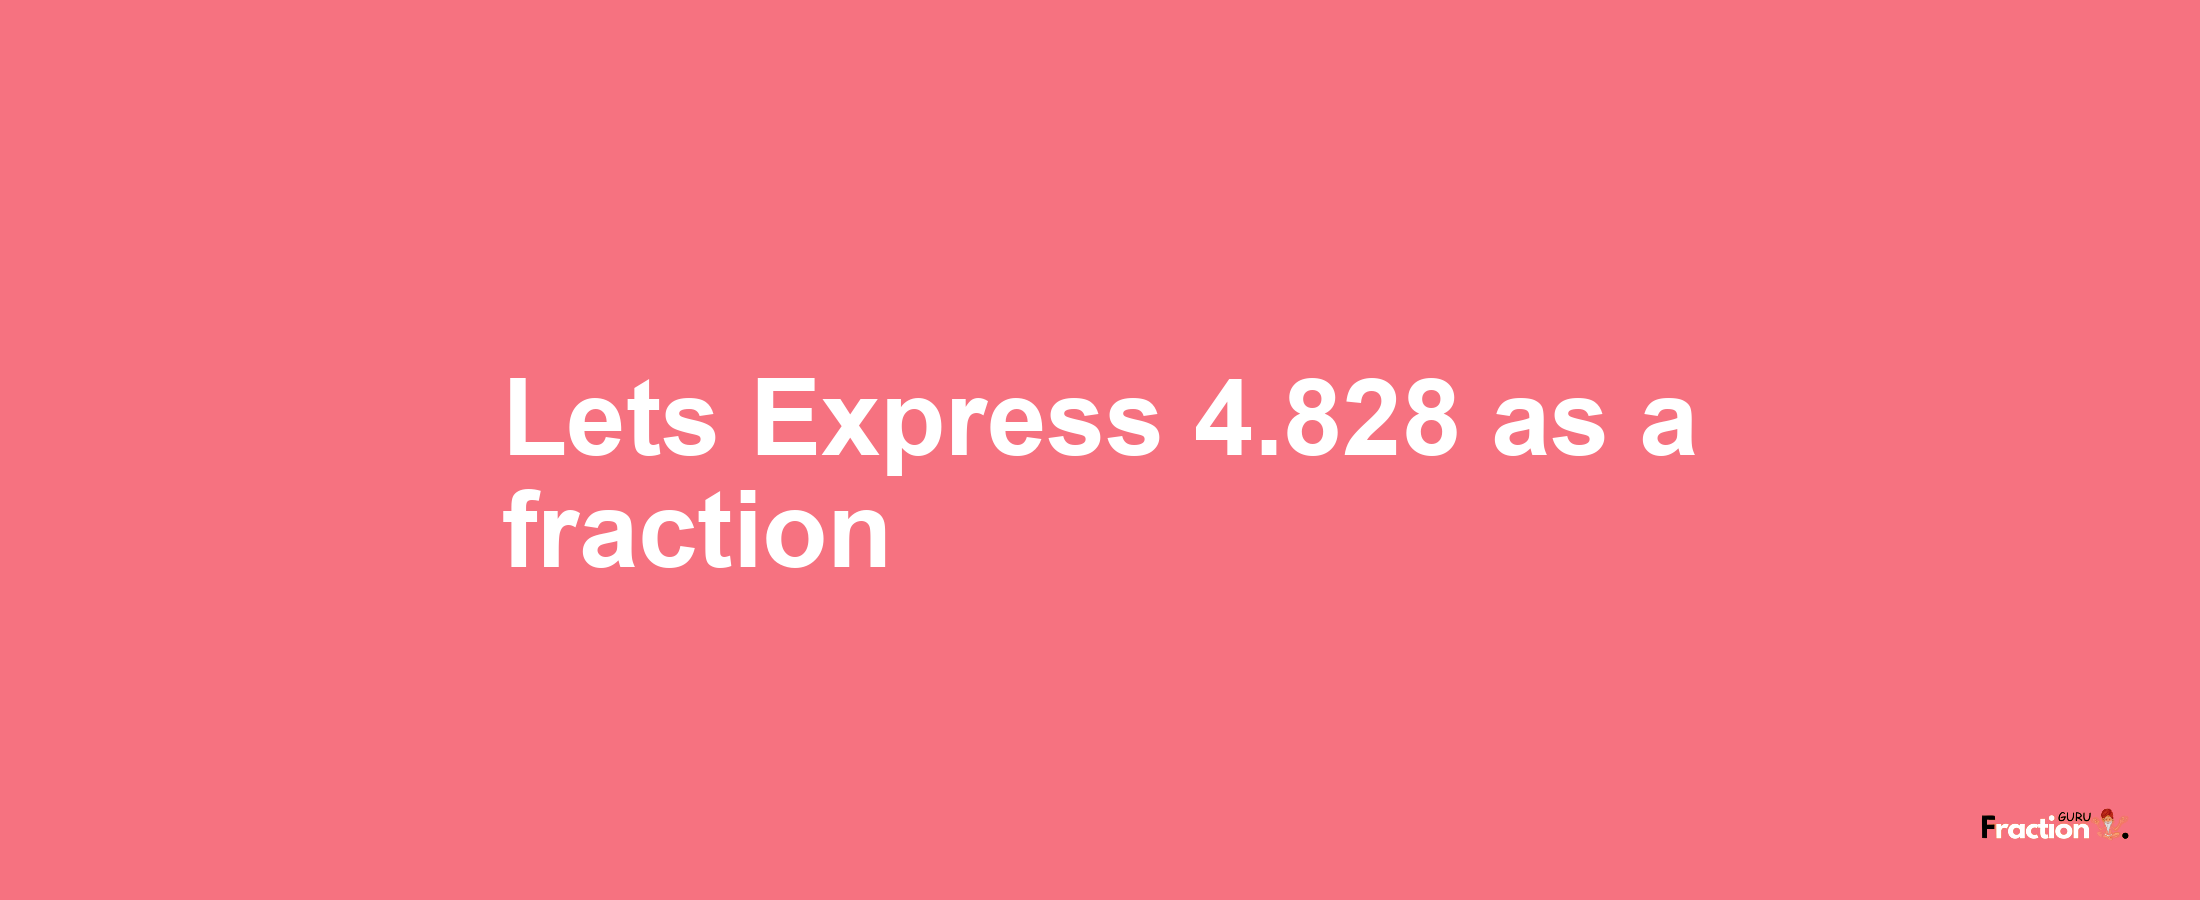 Lets Express 4.828 as afraction